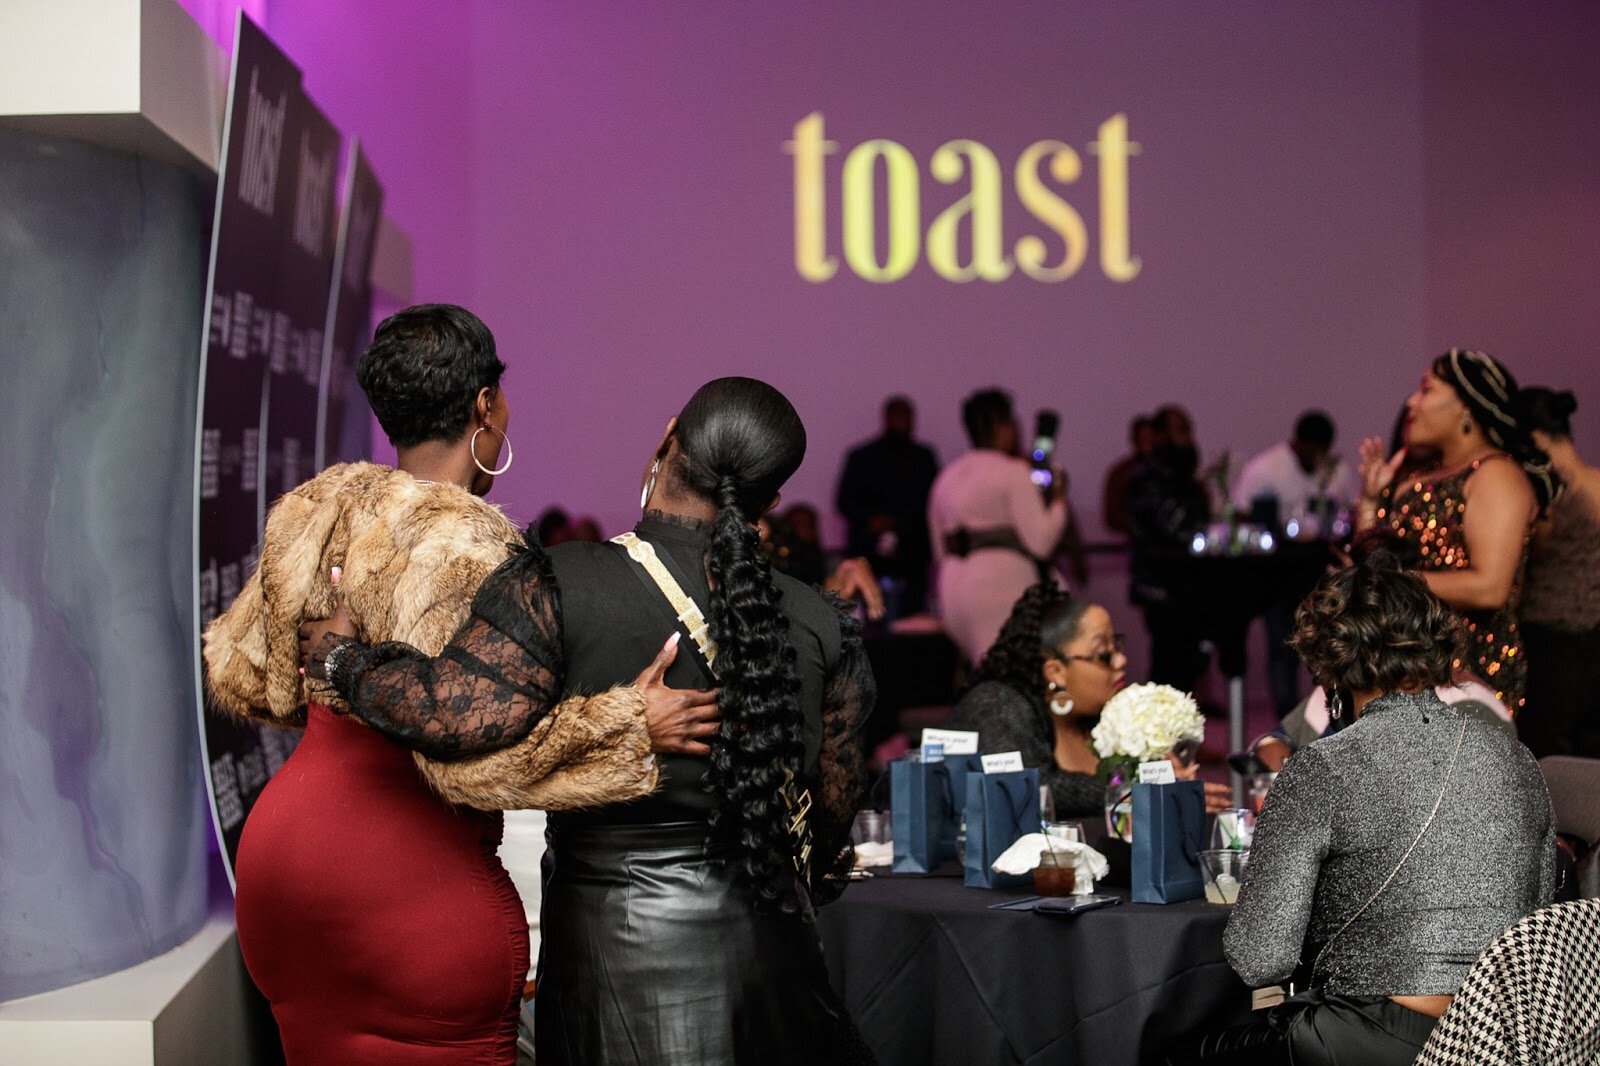 Guests mingle and enjoy themselves during the third annual Toast Awards, hosted by Beats x Beers, at the Flint Institute of Arts on Saturday, Dec. 17, 2022. (Jenifer Veloso | Flintside)